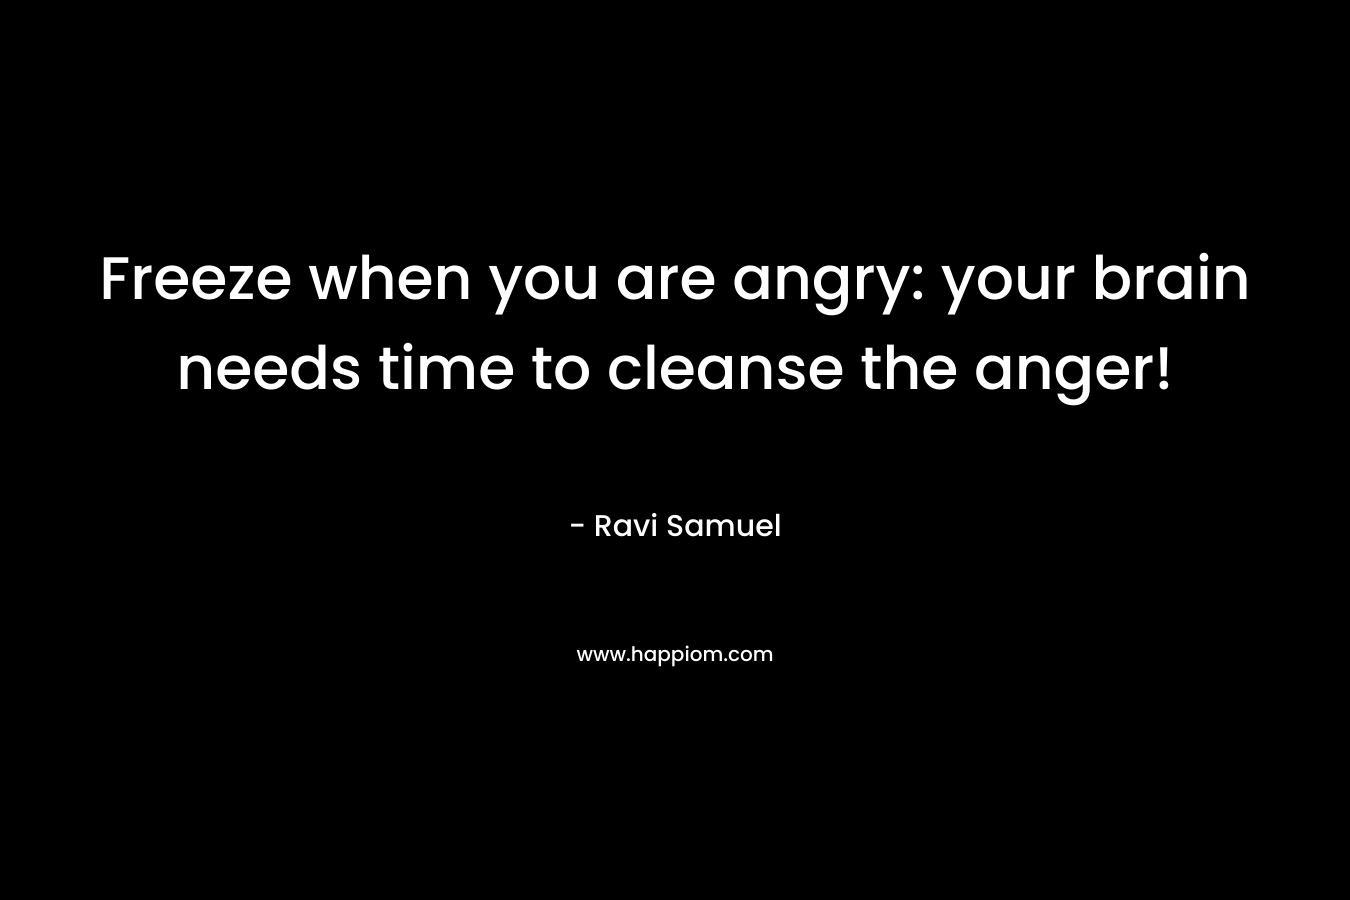 Freeze when you are angry: your brain needs time to cleanse the anger!